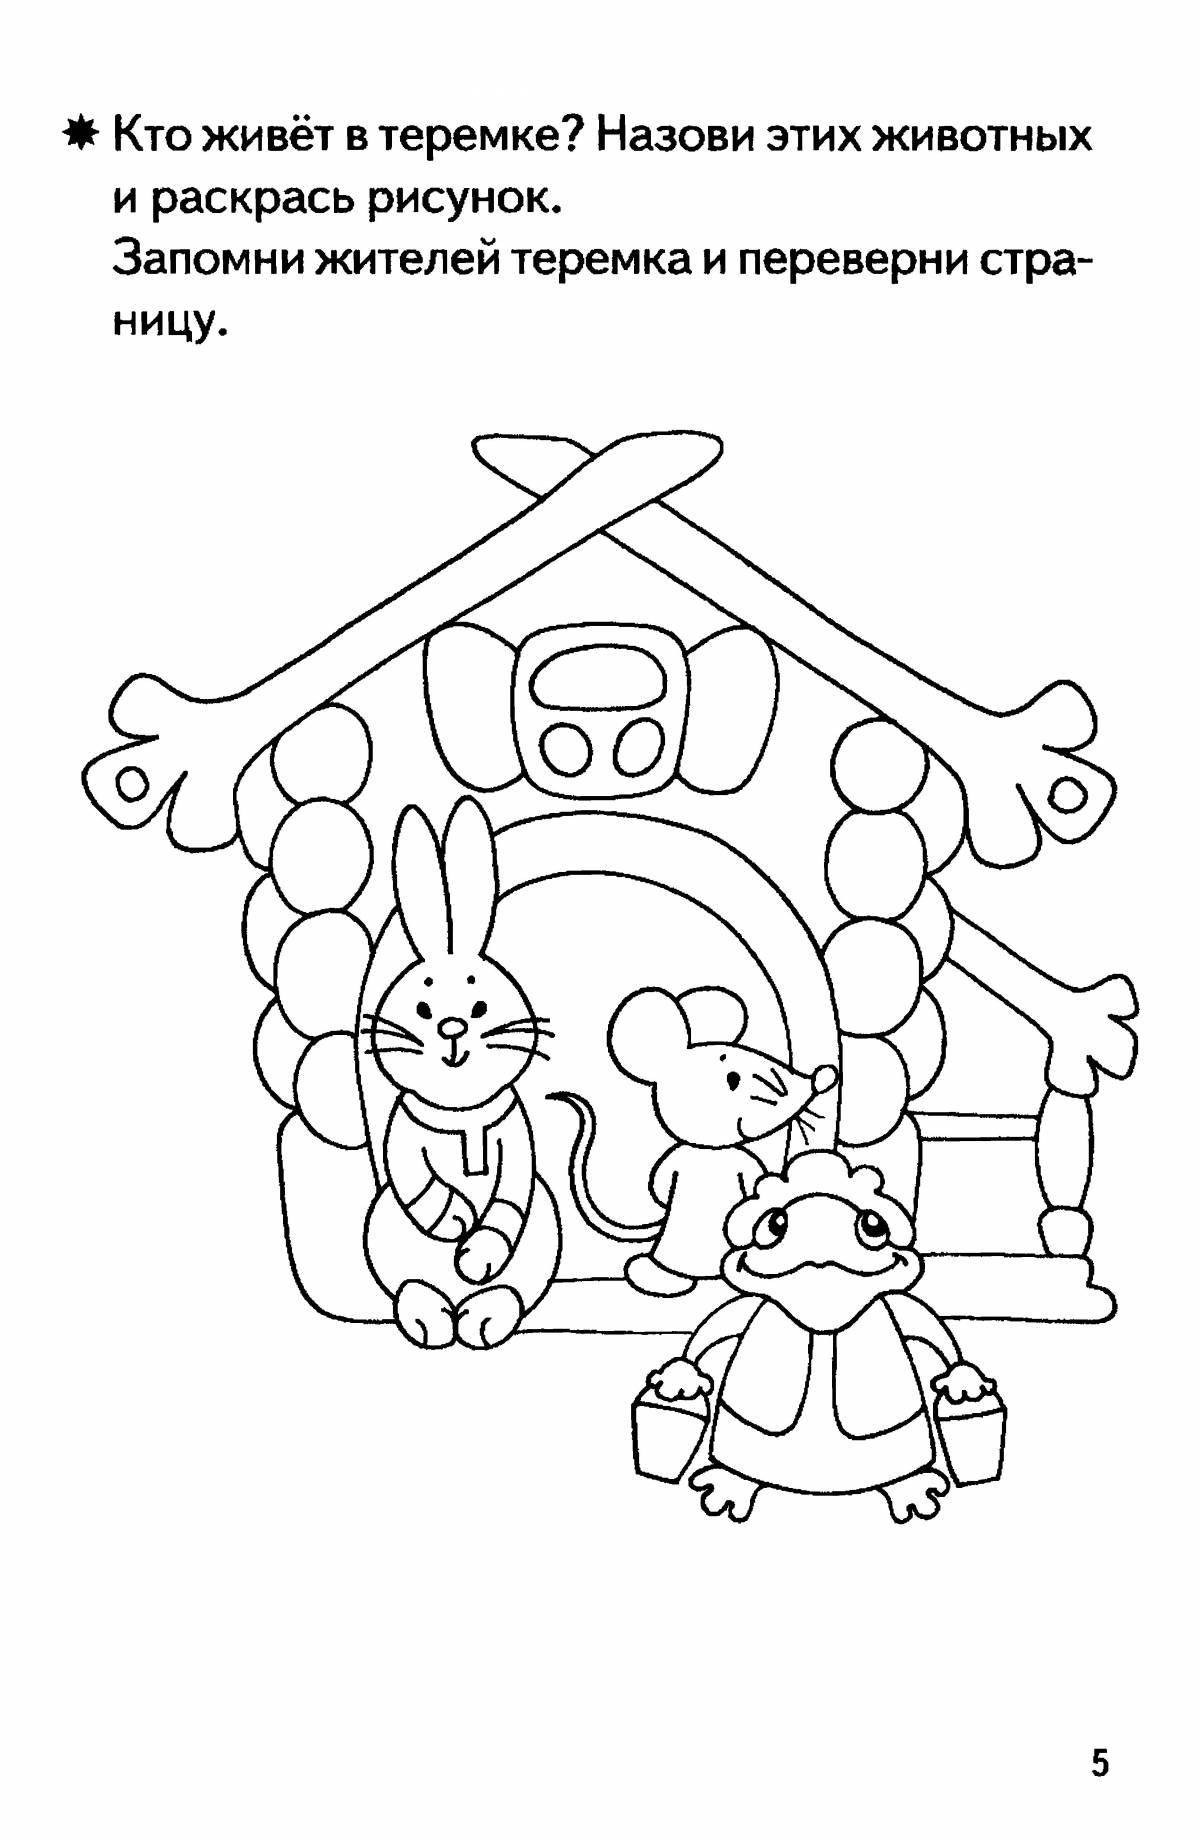 Merry little house coloring for kids